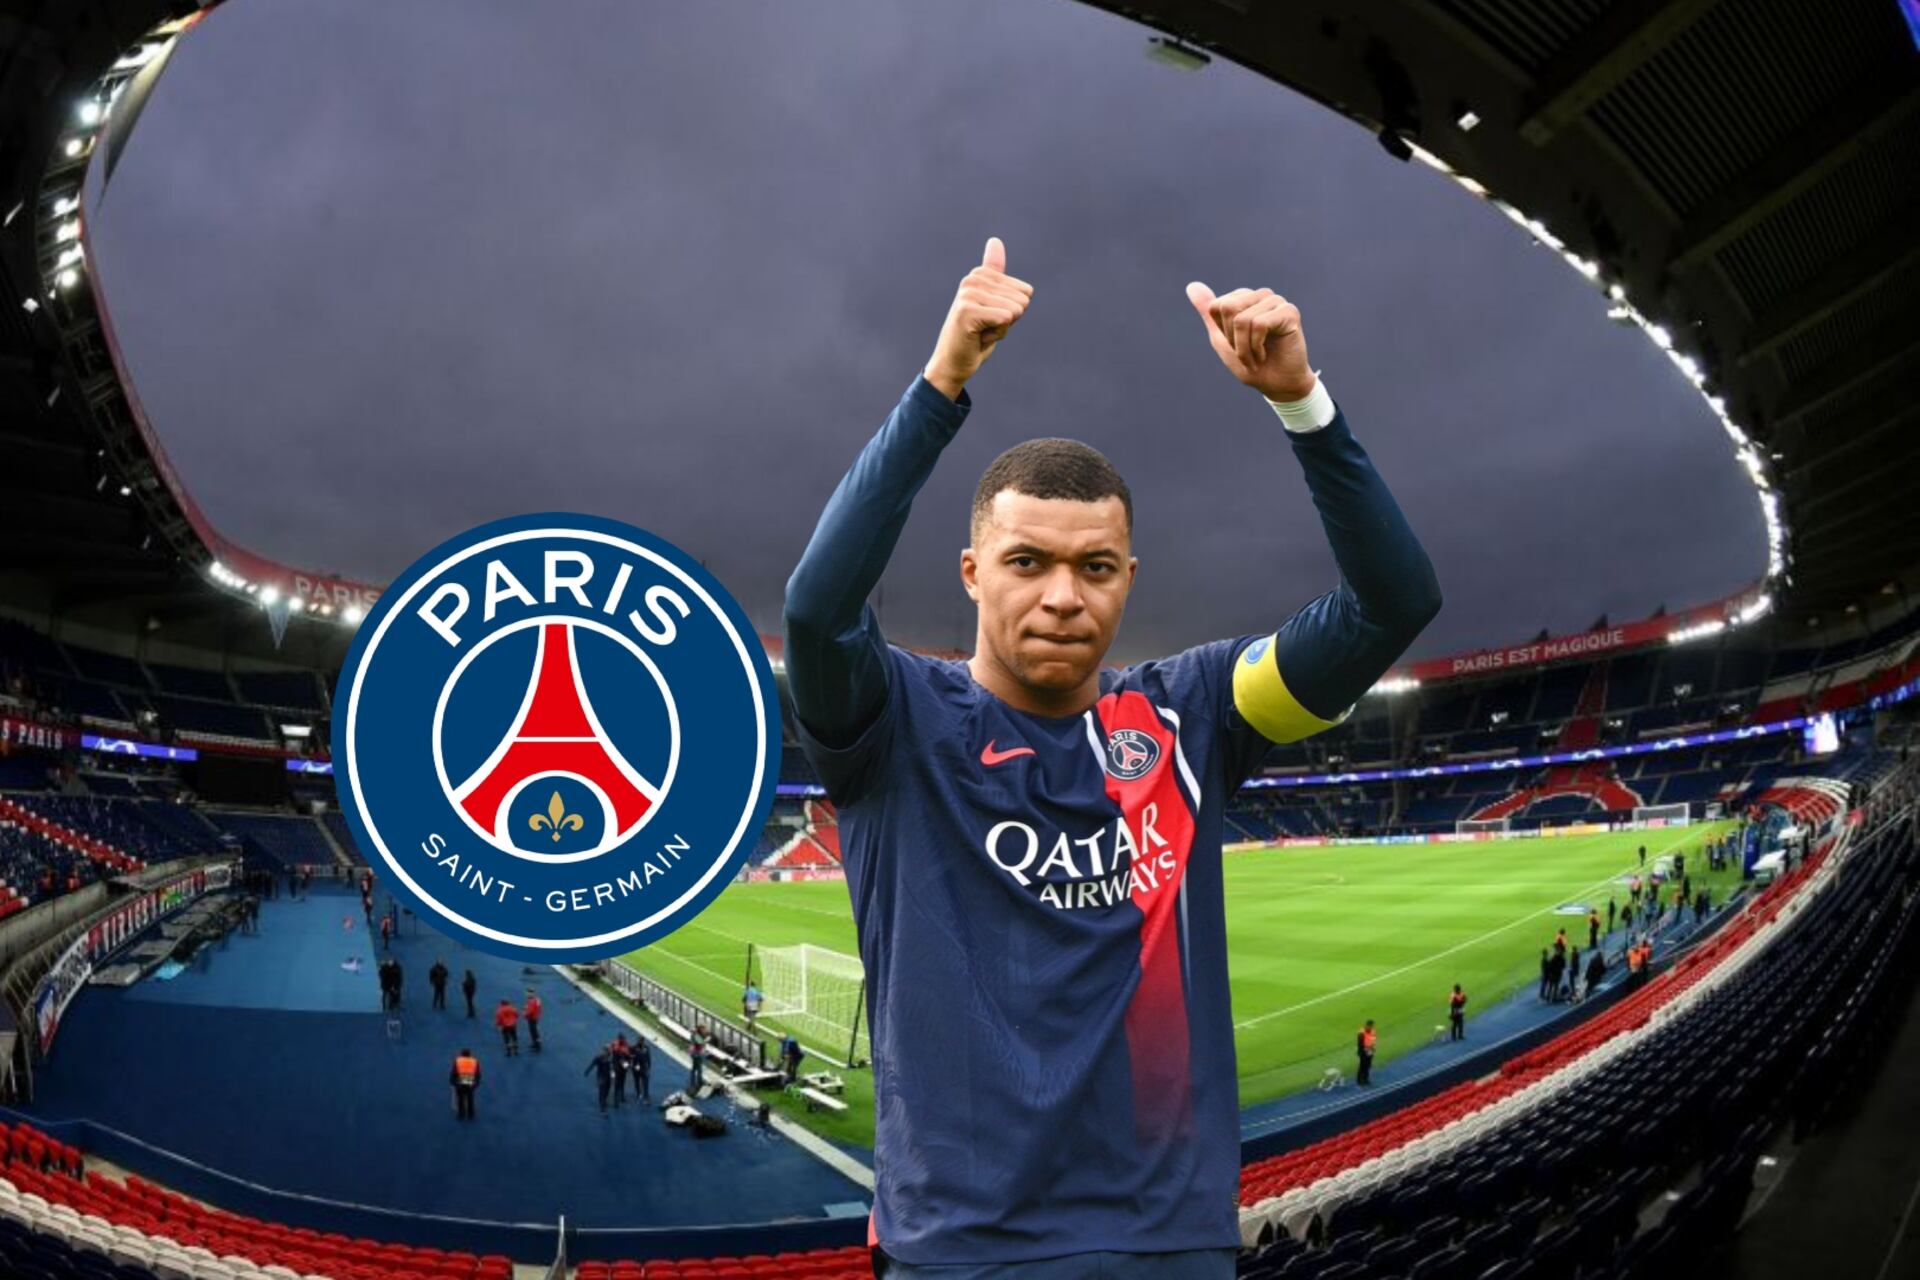 Mbappé set to play his last game for PSG in Paris, what the French club plans to do for Kylian before he leaves